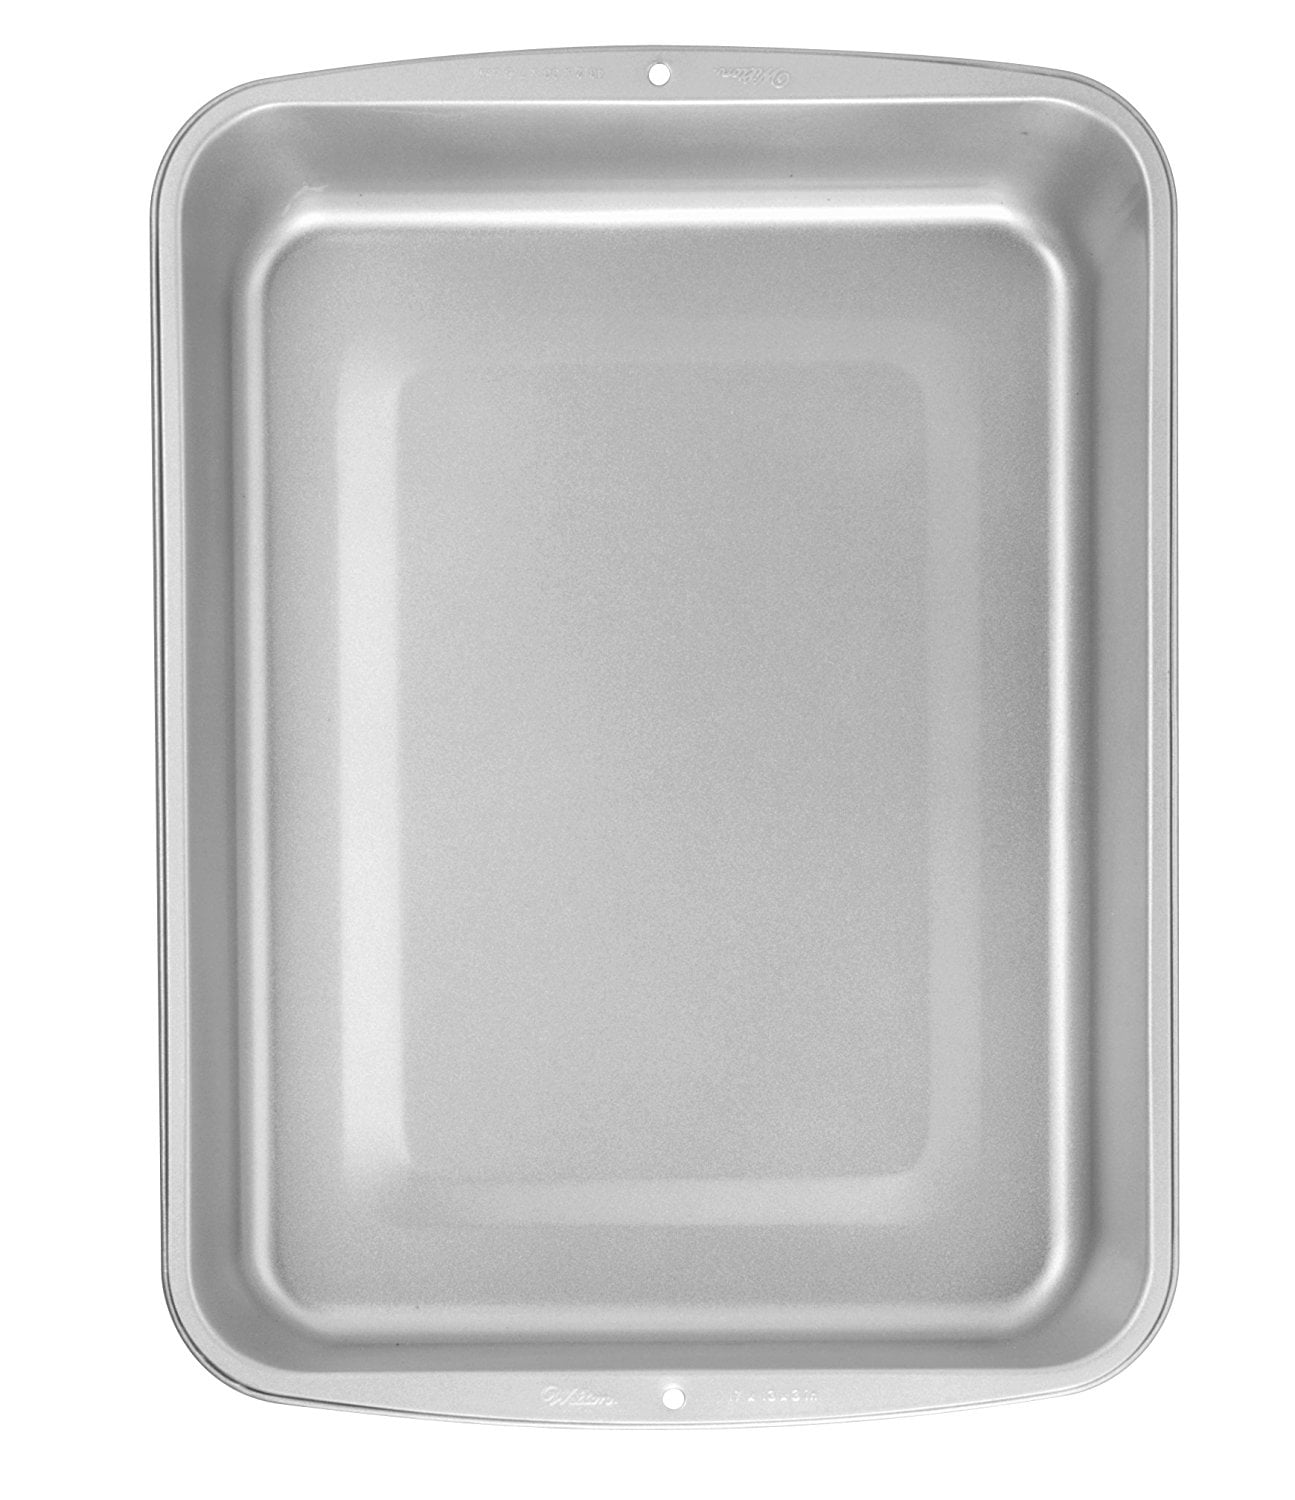 Wilton 11-1/2 in. W x 17-1/4 in. L Cookie and Jelly Roll Pan Silver